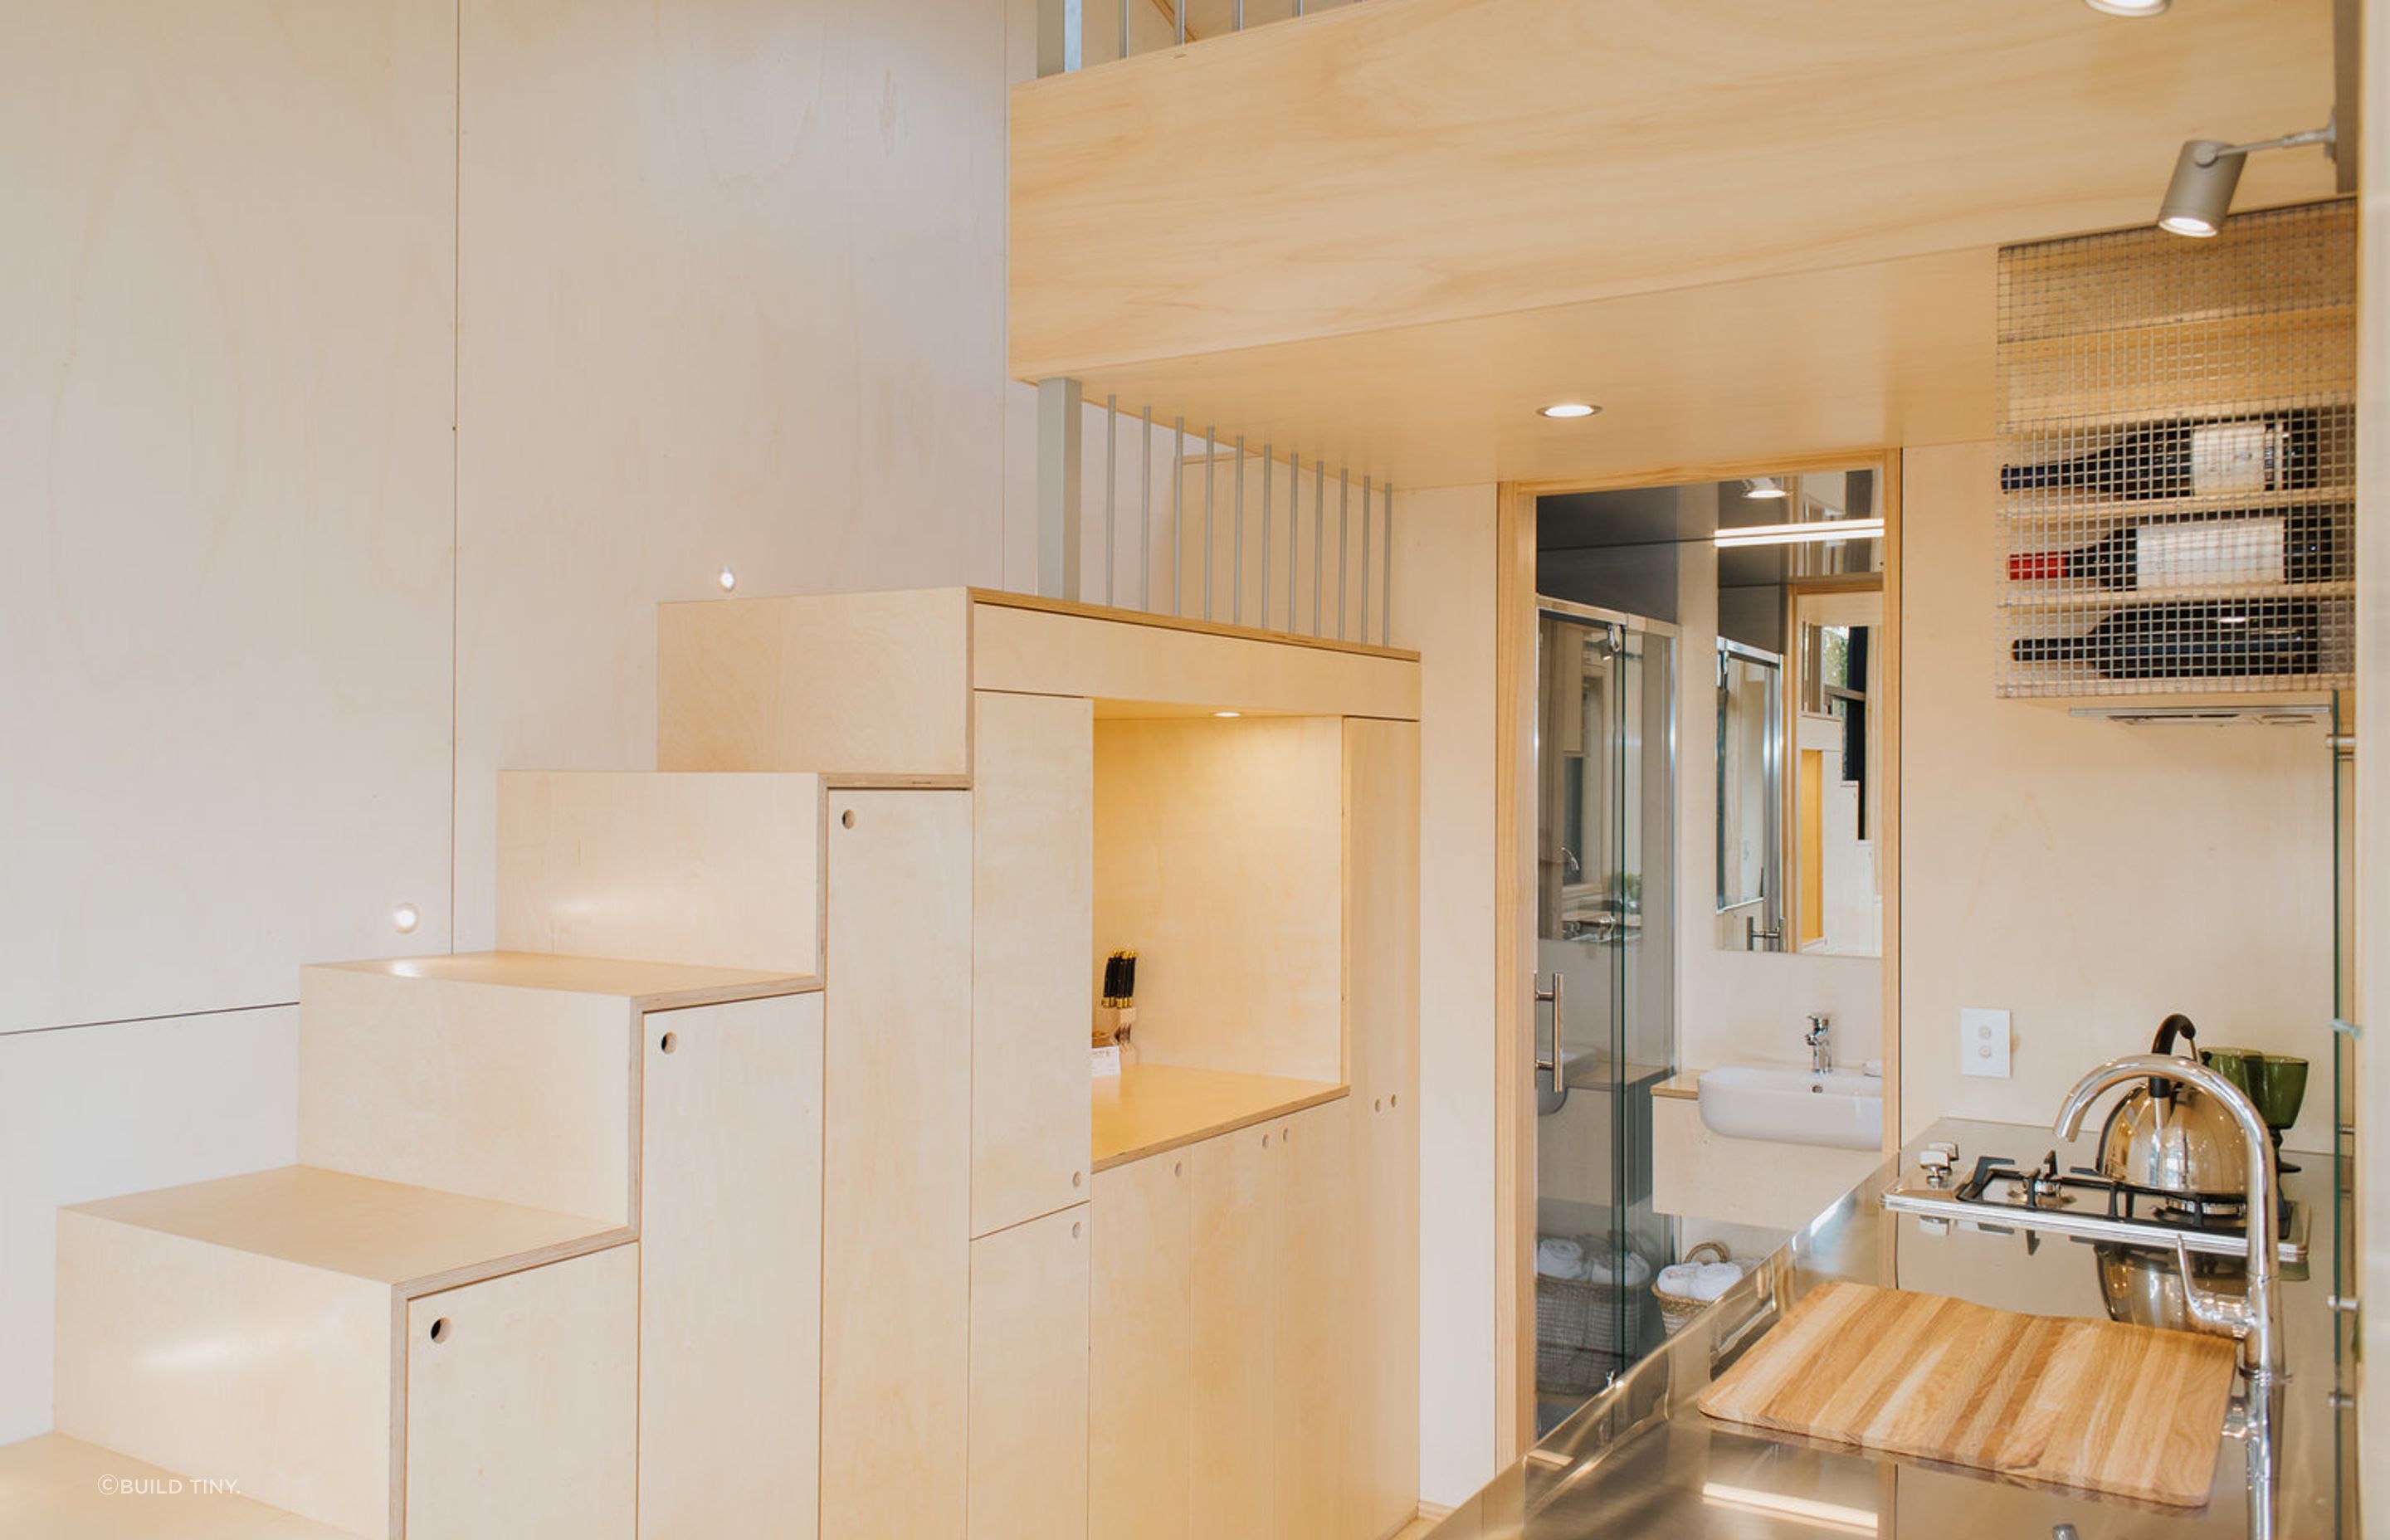 The plywood staircase incorporates cupboards and an alcove for kitchen and household storage. Photography supplied by Build Tiny.